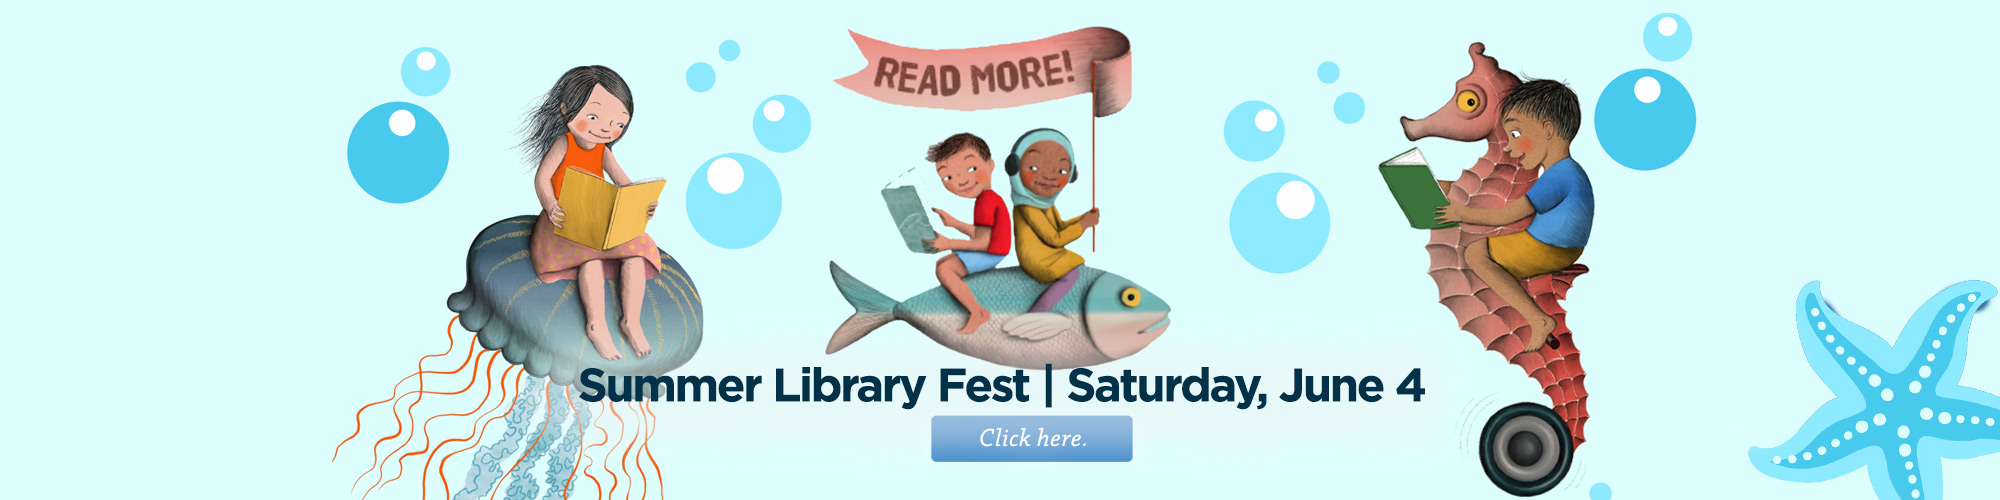 Summer Library Fest is Saturday June 4